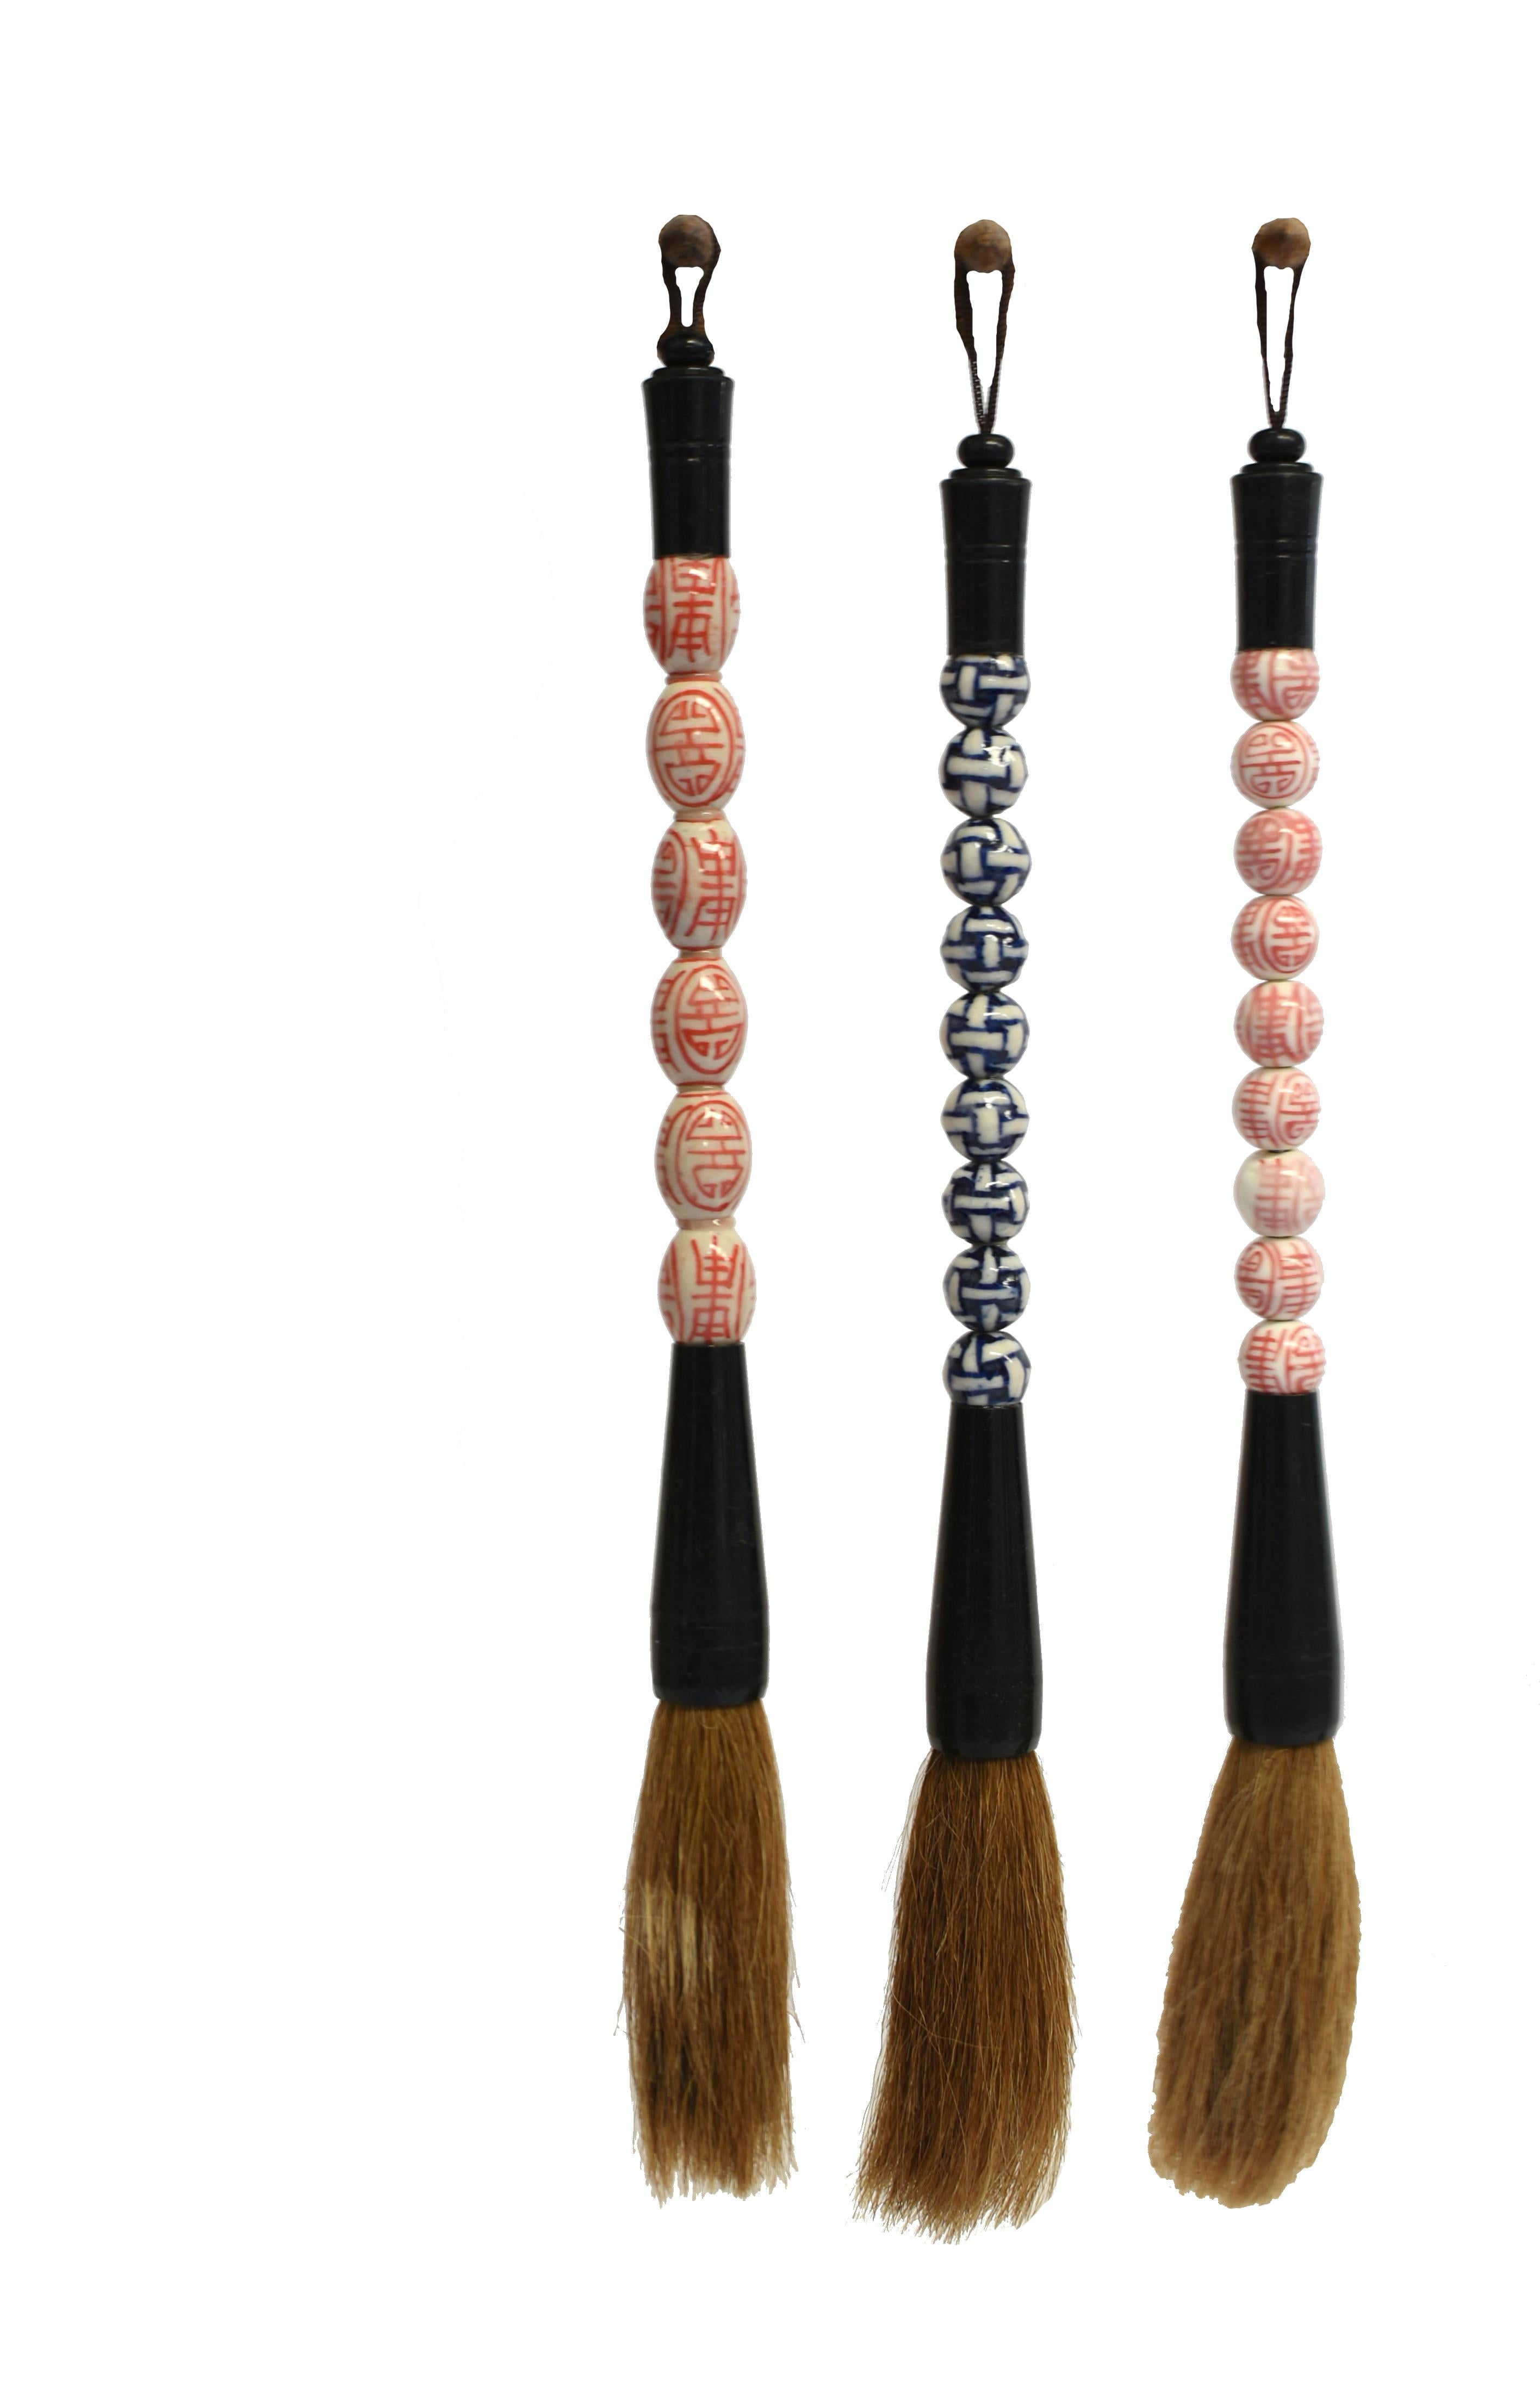 A set of 3 beautiful porcelain handle Chinese calligraphy brushes. The handles with hand painted oval and round porcelain balls of longevity motifs in cinnabar red and basketweave in blue and white. Horse hair. These are excellent brushes for